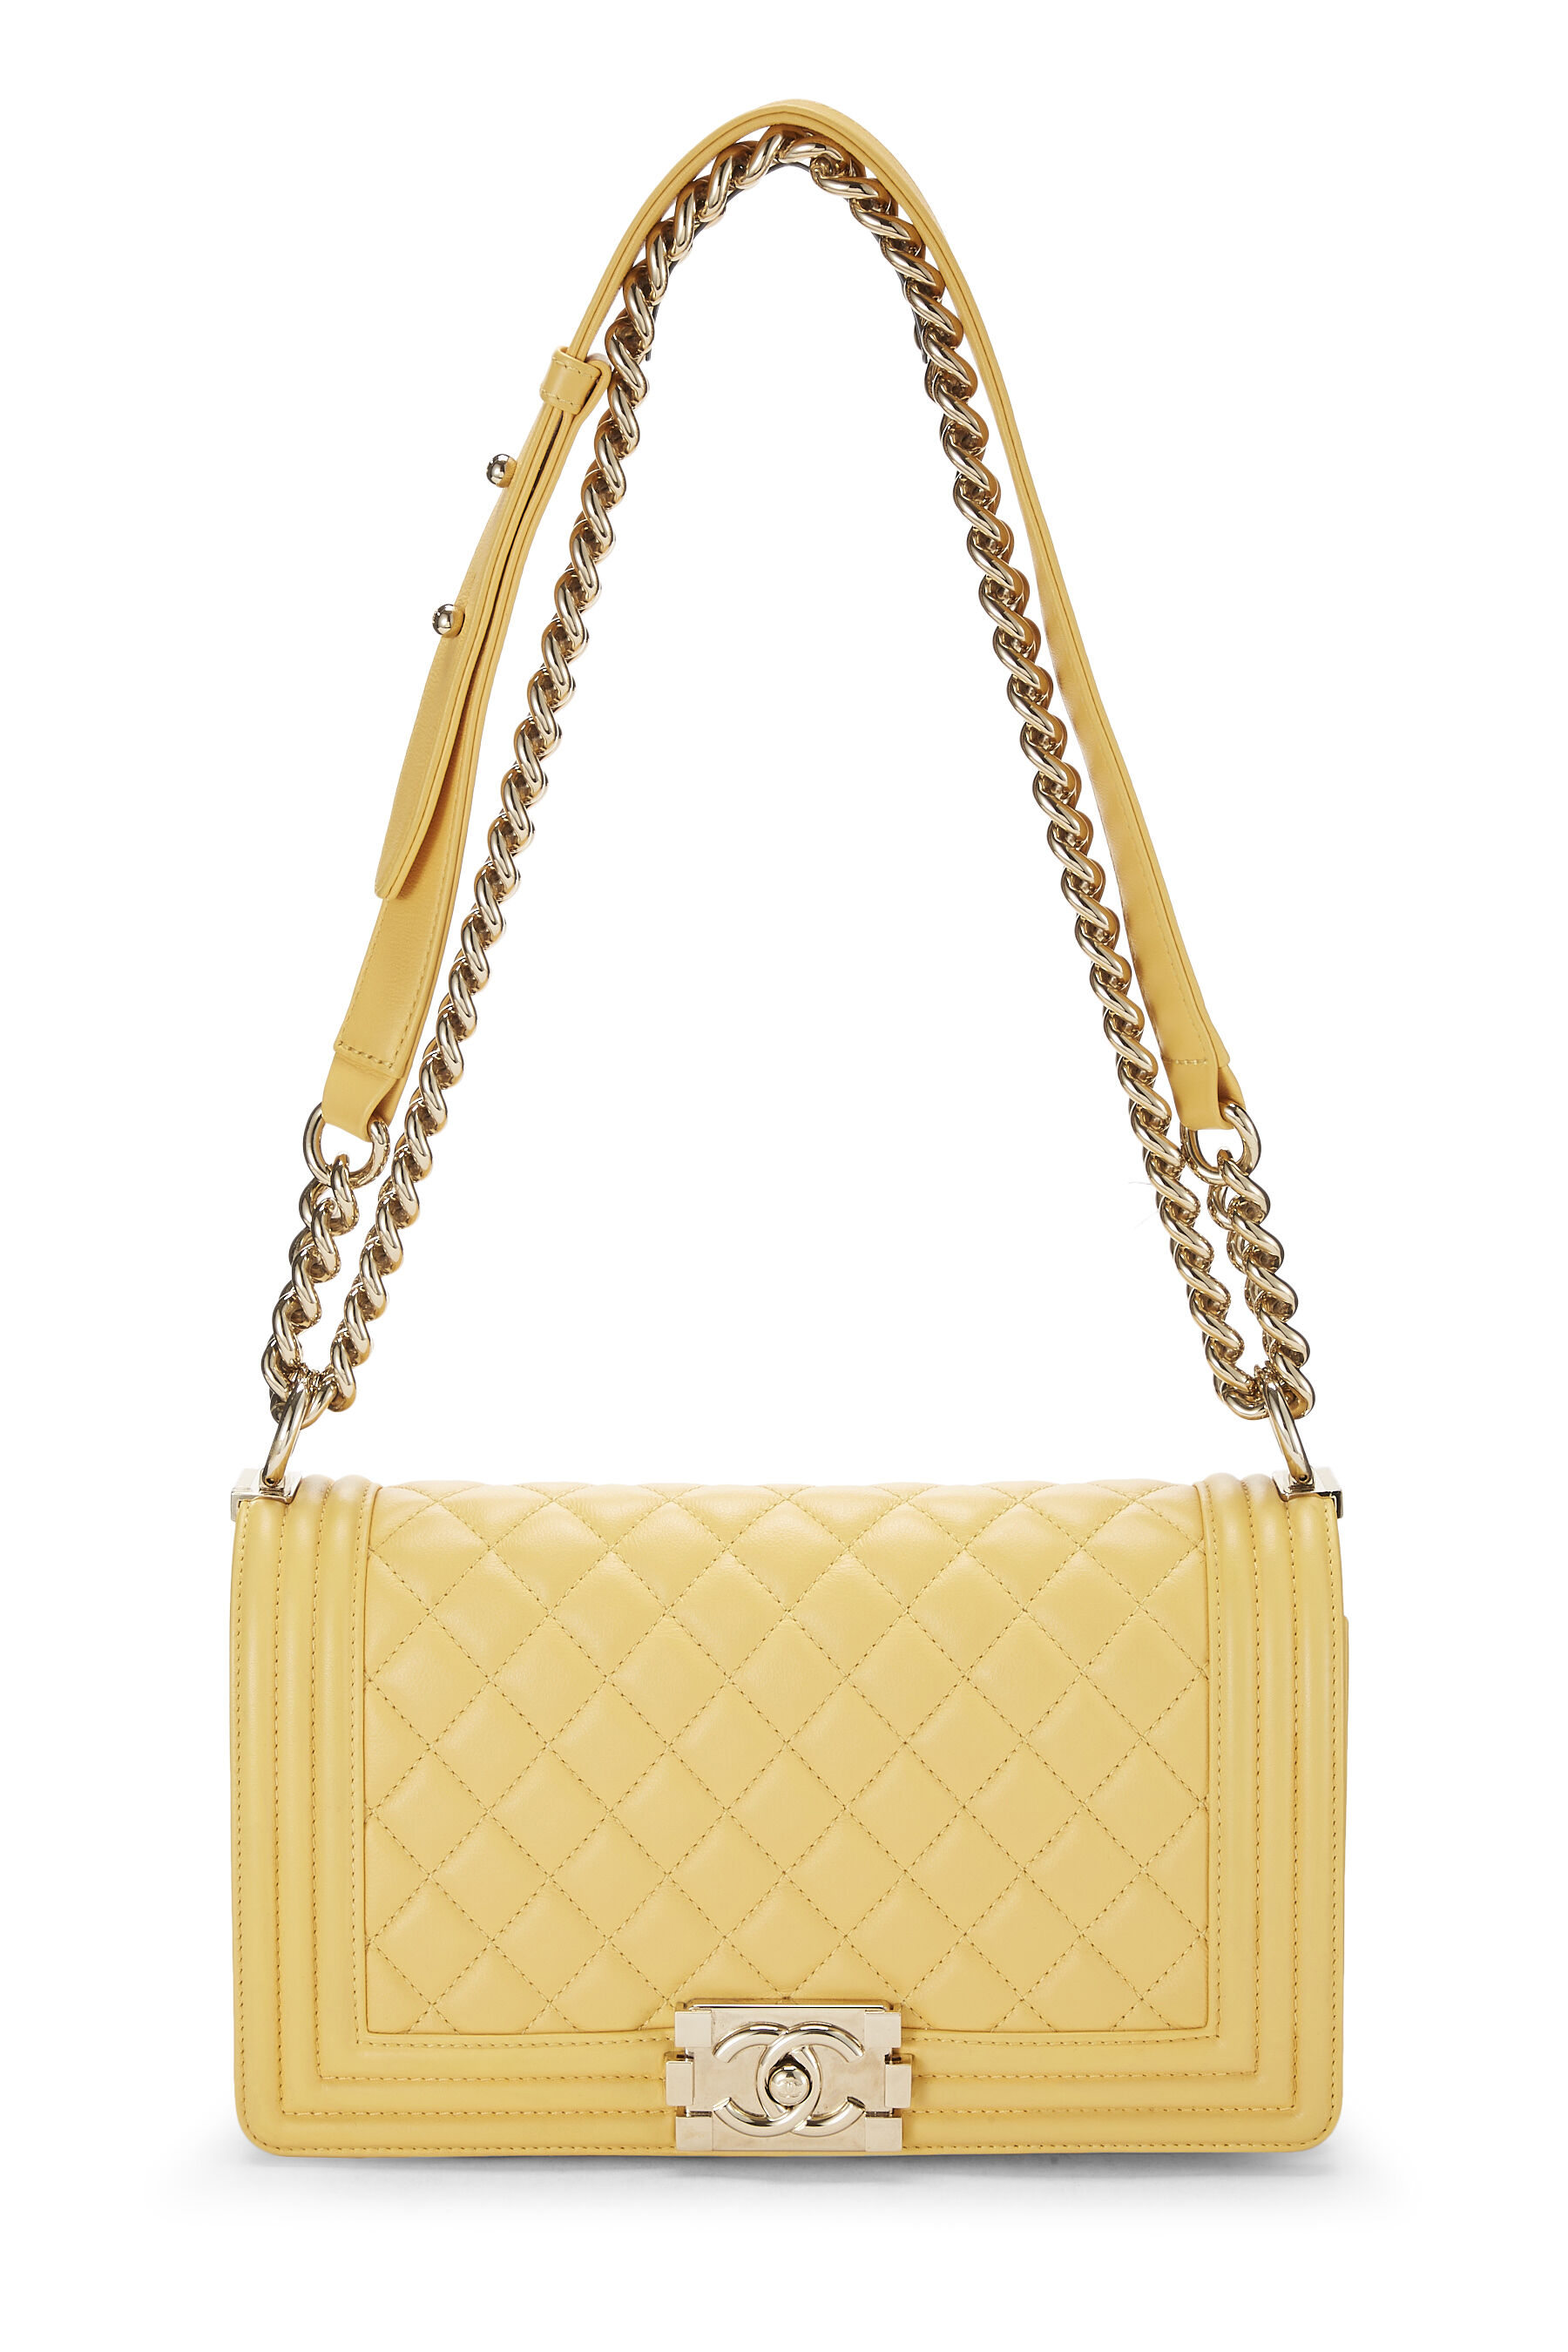 Chanel Quilted Mini Square Yellow Lambskin Gold Hardware – Coco Approved  Studio